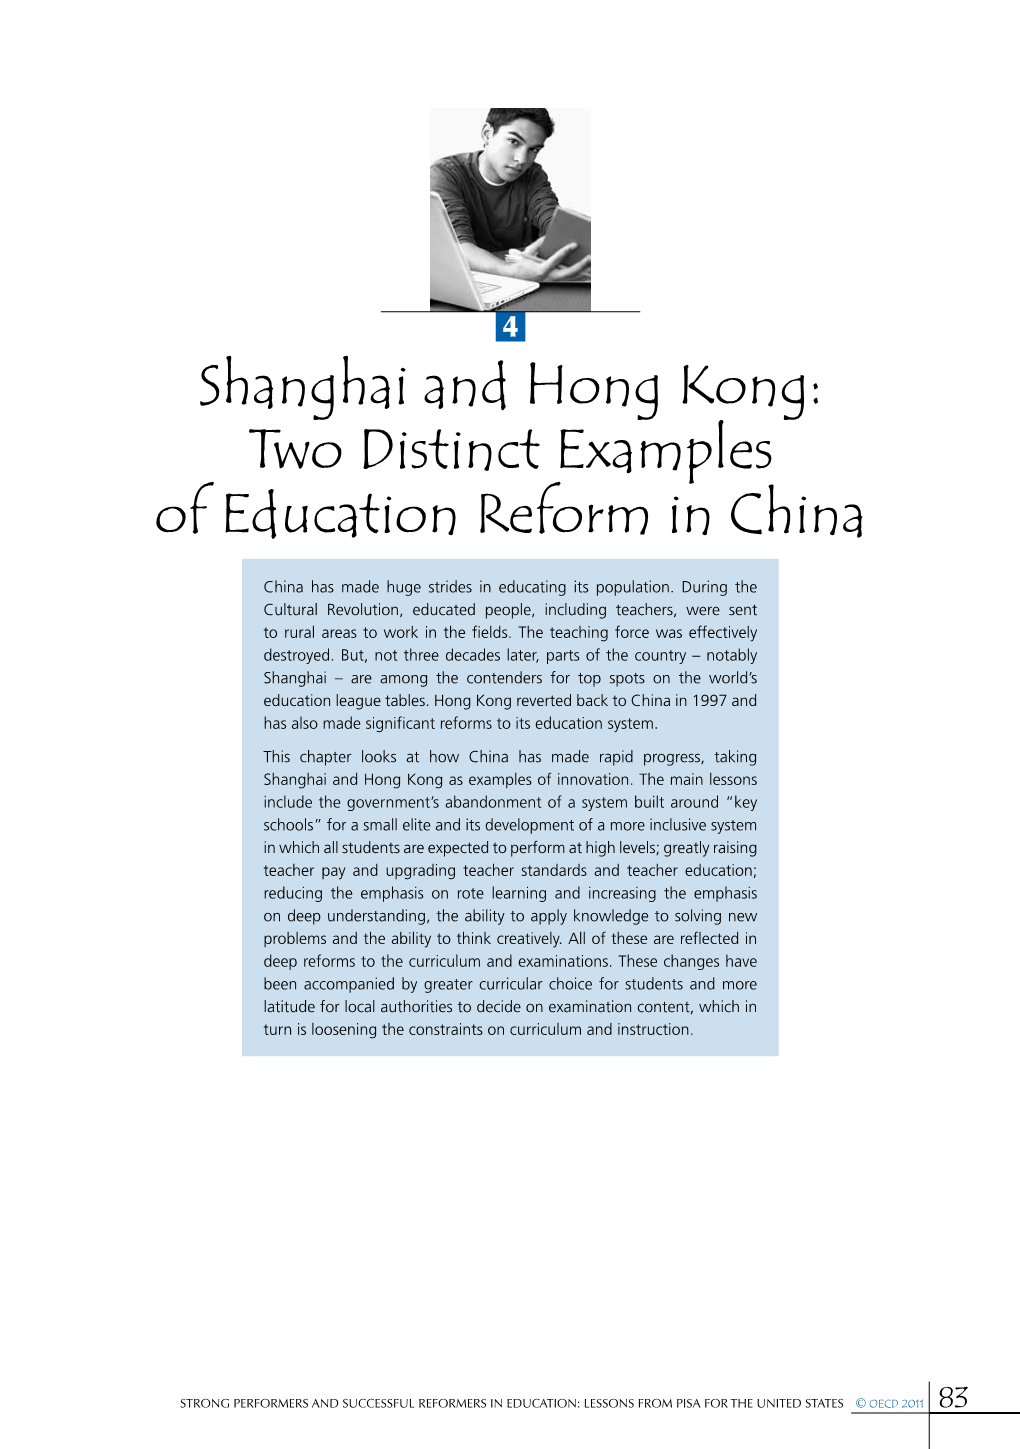 Shanghai and Hong Kong: Two Distinct Examples of Education Reform in China